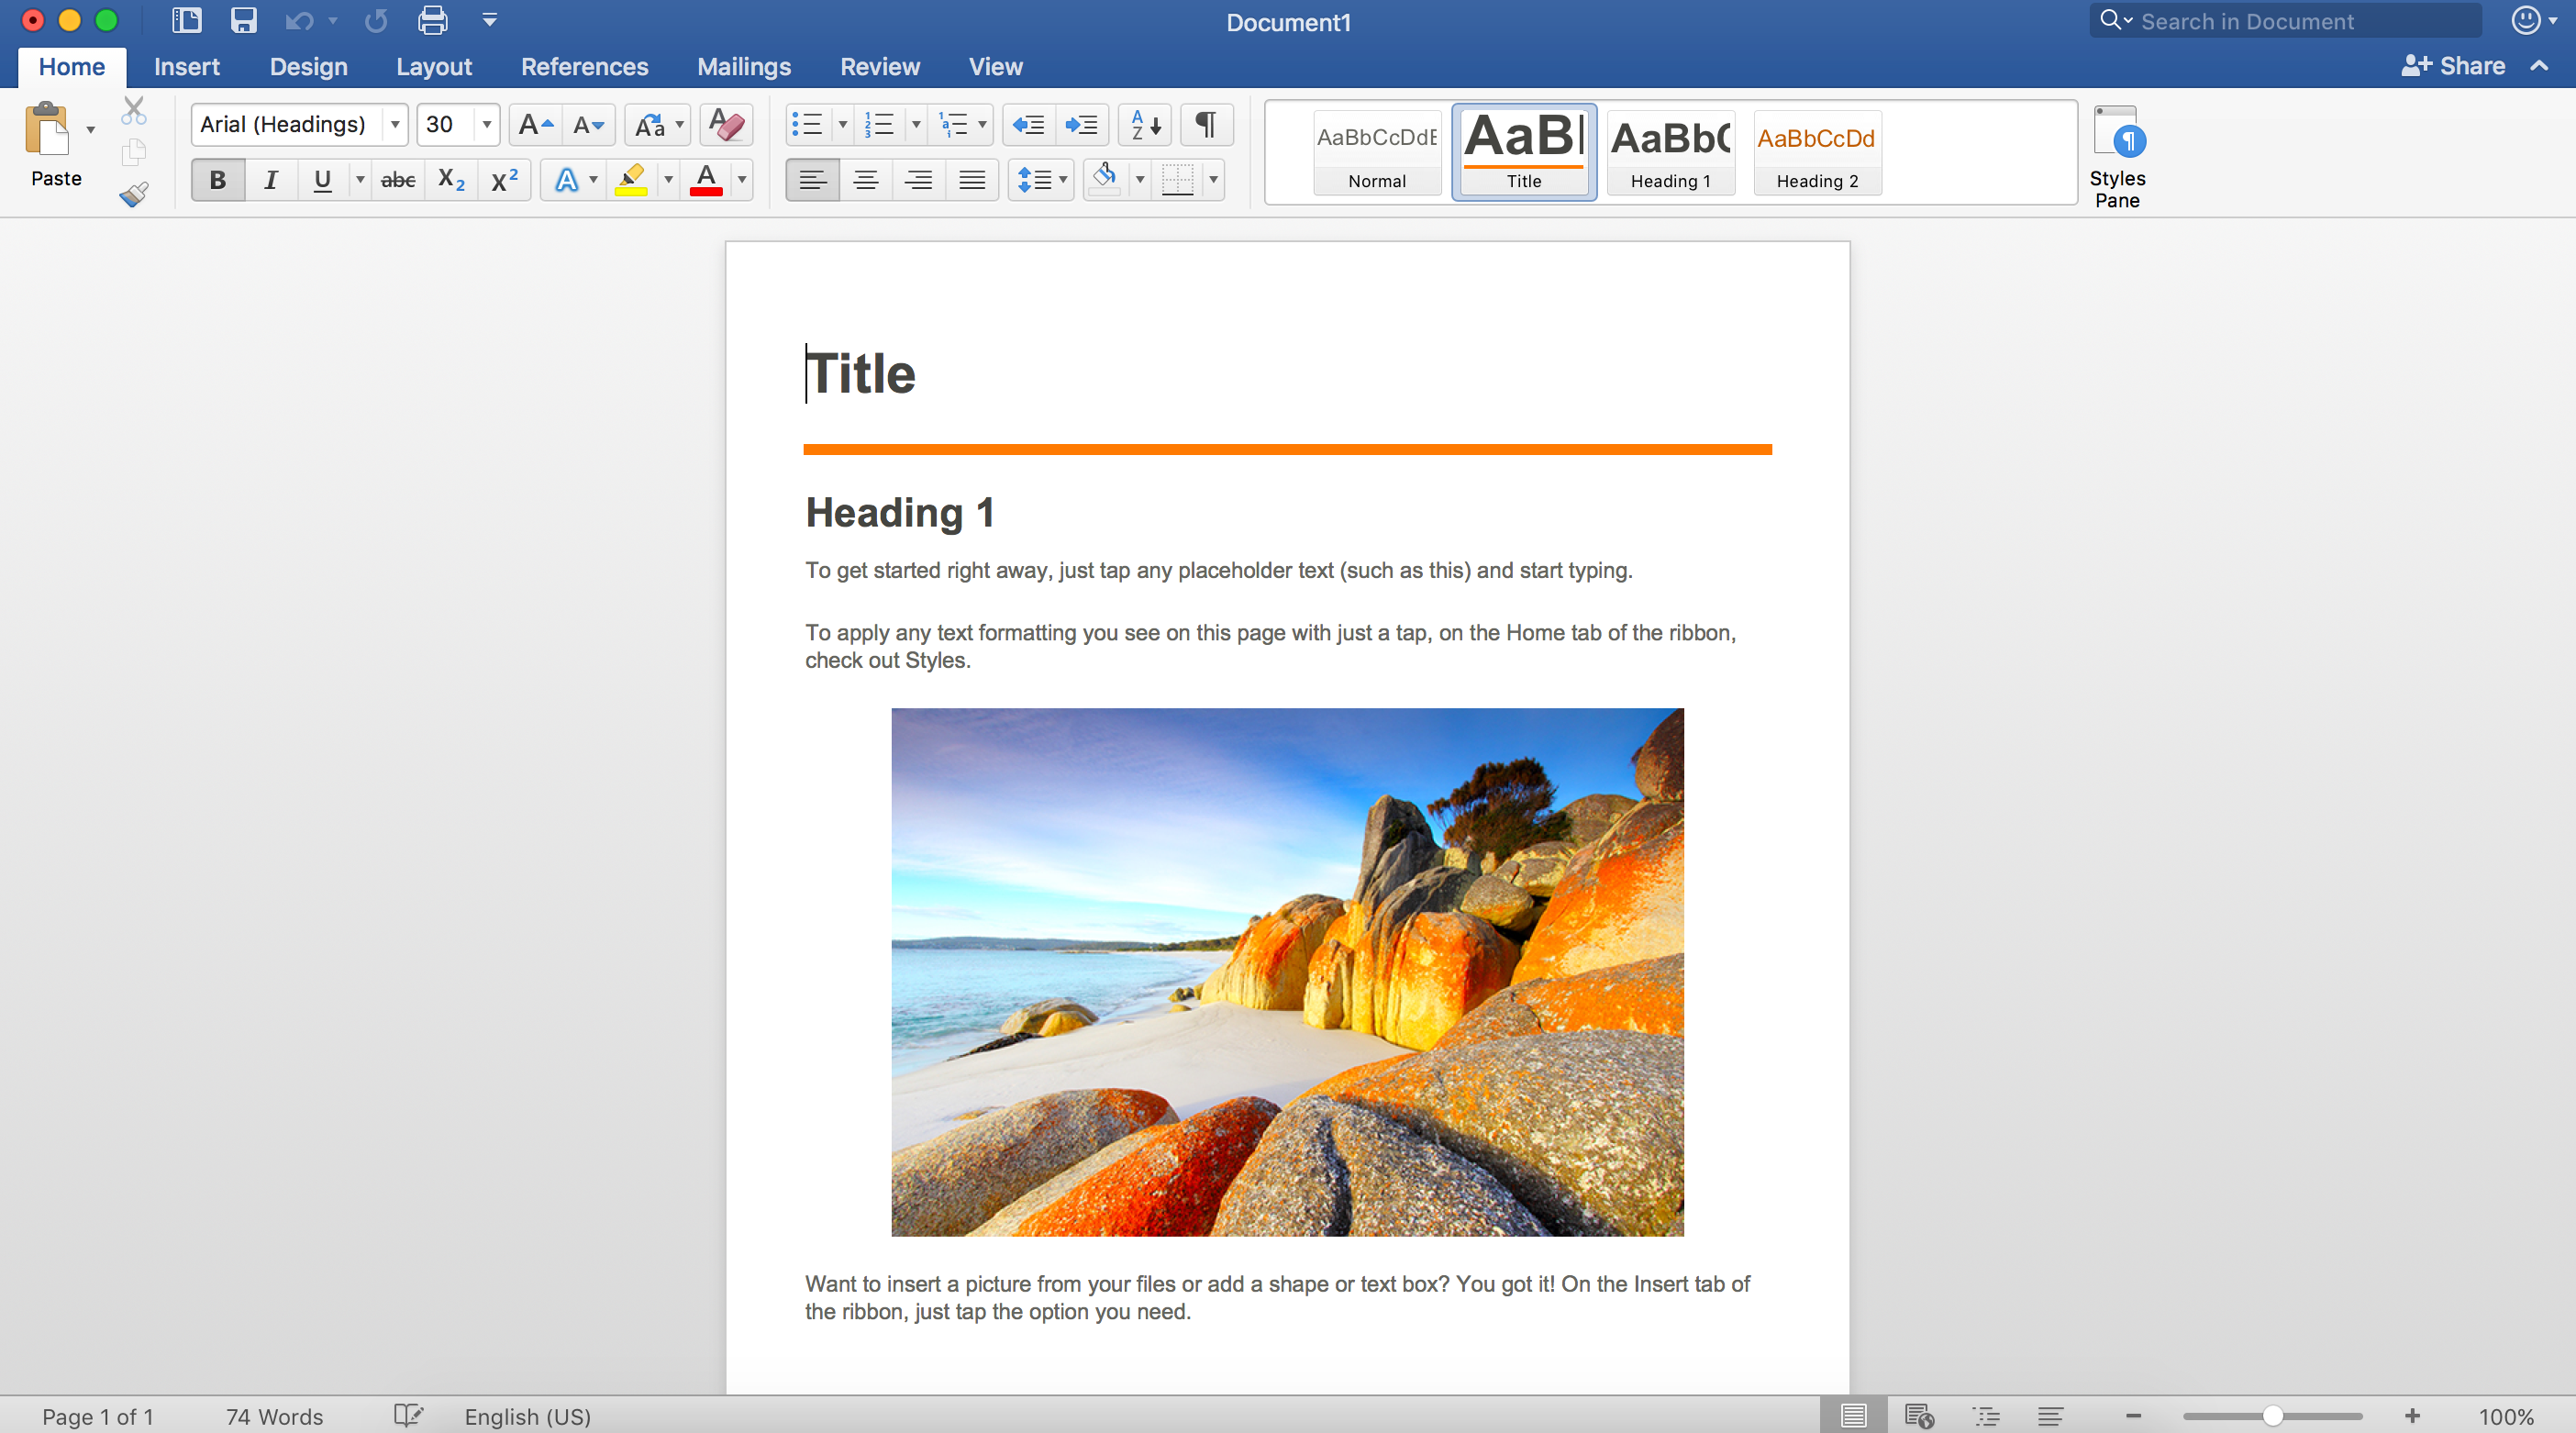 Microsoft Word Software - Add titles, headers, text, images, and more